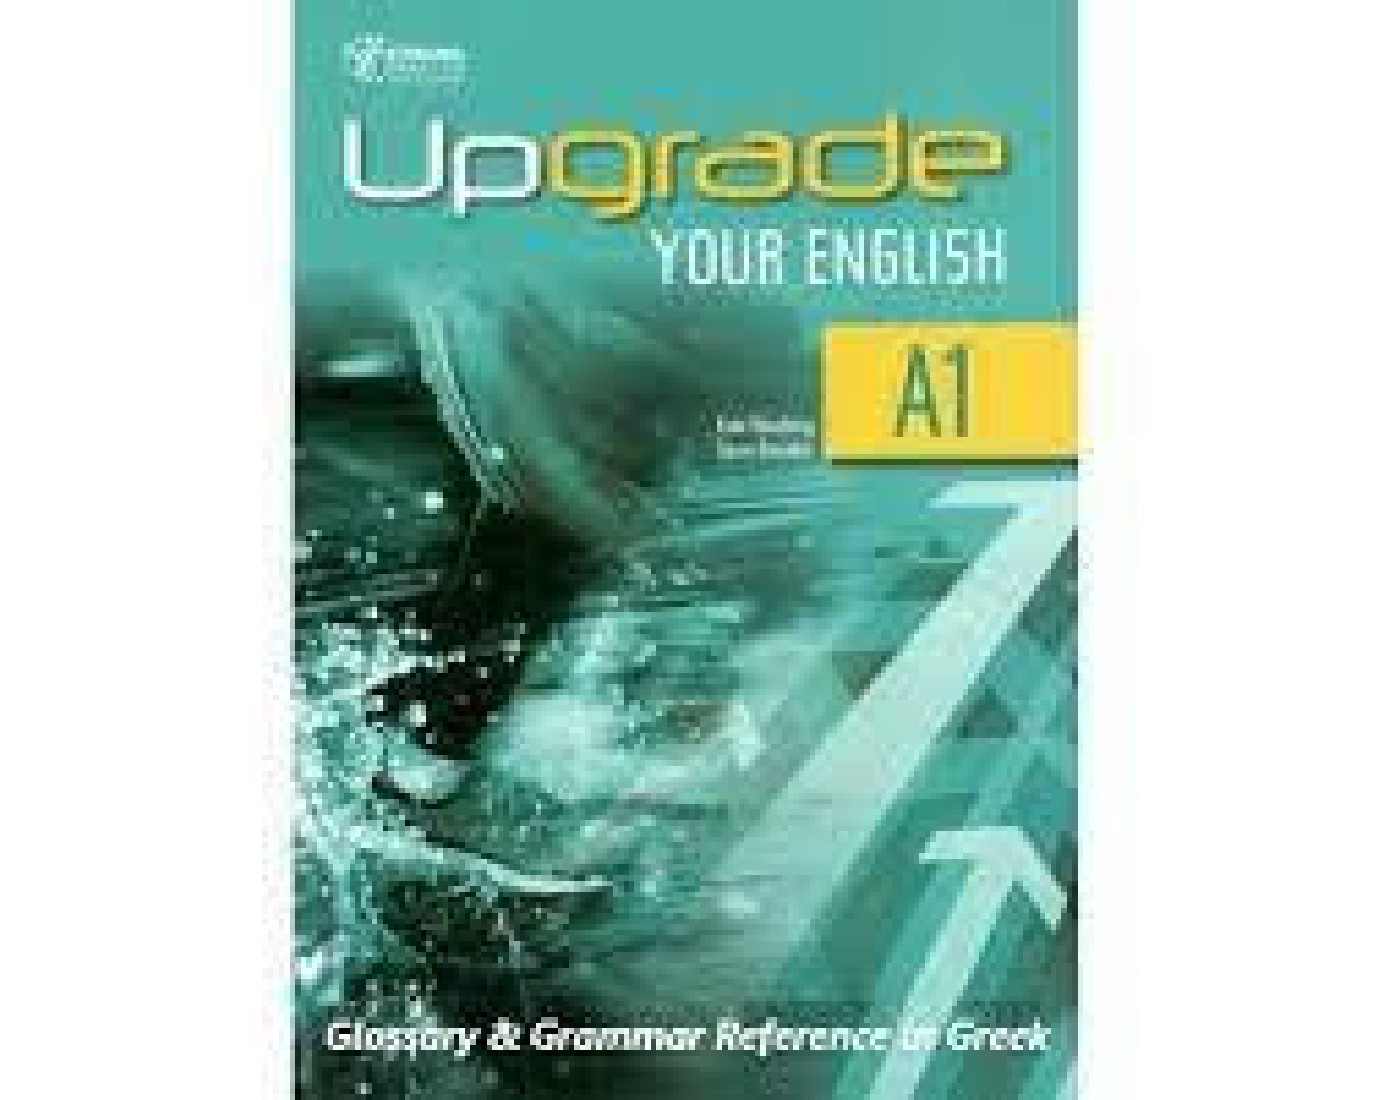 UPGRADE YOUR ENGLISH A1 GLOSSARY